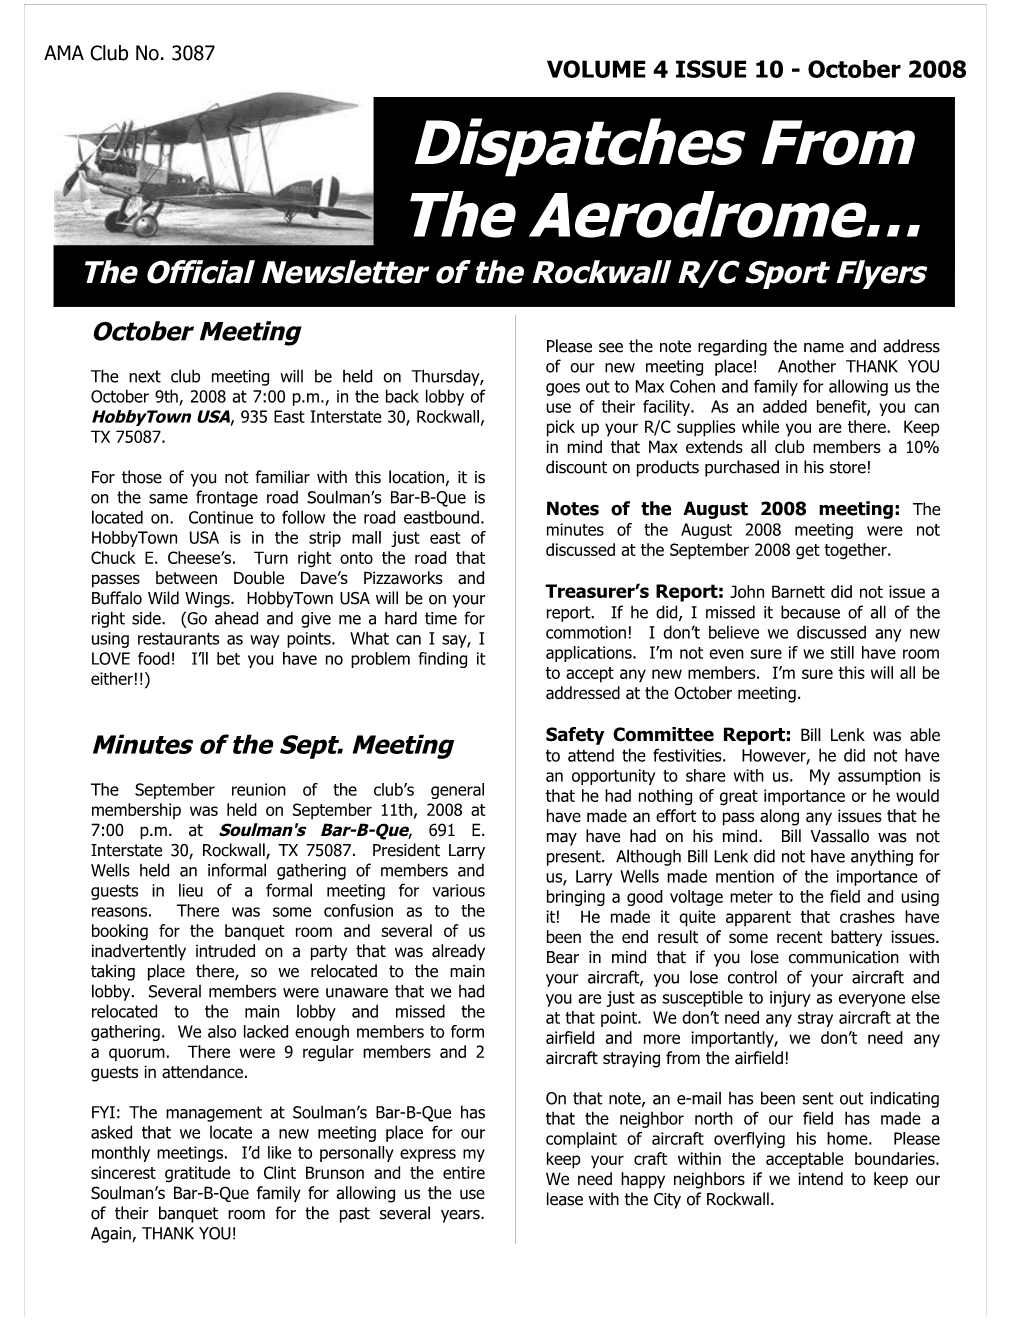 Dispatches from the Aerodrome October 2008Page 1